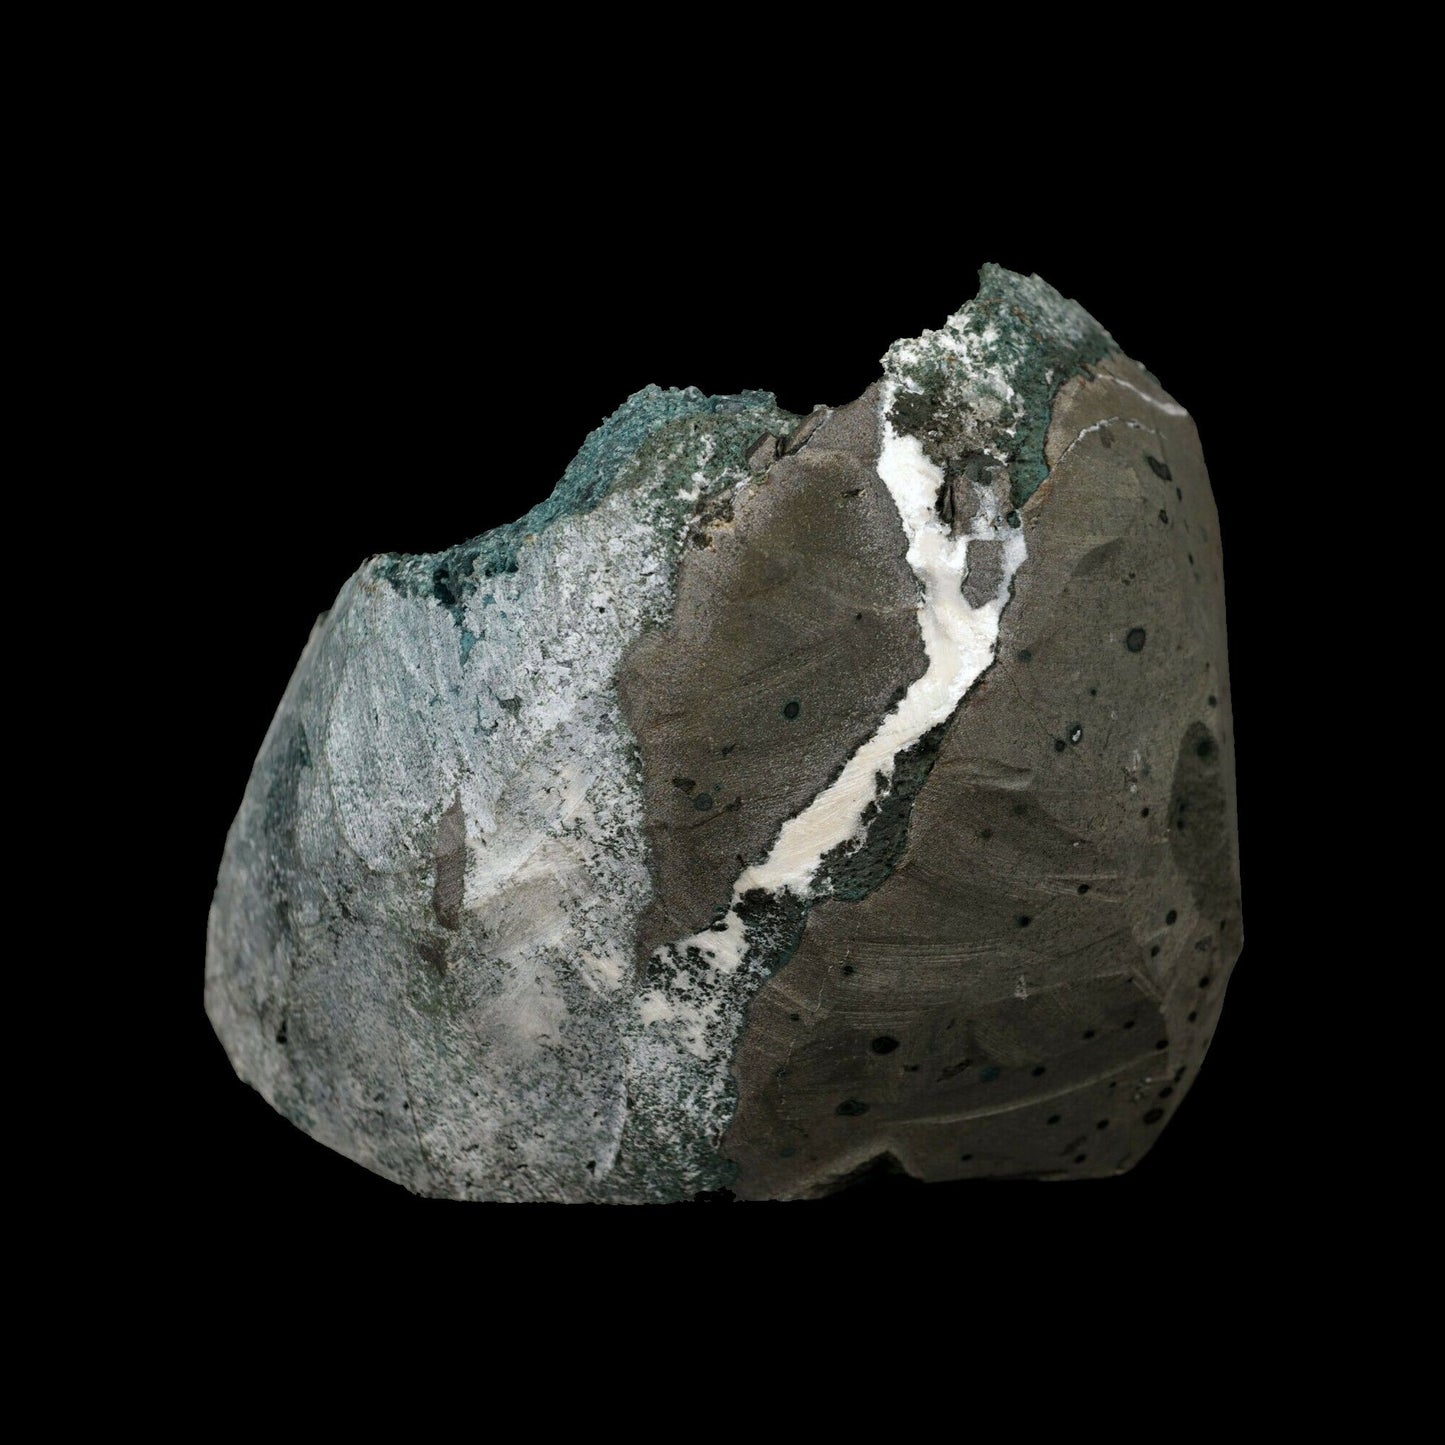 Apophyllilte Marshy Crystal with Chalcedony Natural Mineral Specimen #…  https://www.superbminerals.us/products/apophyllilte-marshy-crystal-with-chalcedony-natural-mineral-specimen-b-3679  FeaturesDark forest green from the copious amount of Celadonite within. The robust parent Apophyllite crystal that hosts the Celadonite inclusions is actually a series of tightly intergrown, larger crystals accompanied by numerous smaller Apophyllite crystals that are clustered on some of the faces or along the